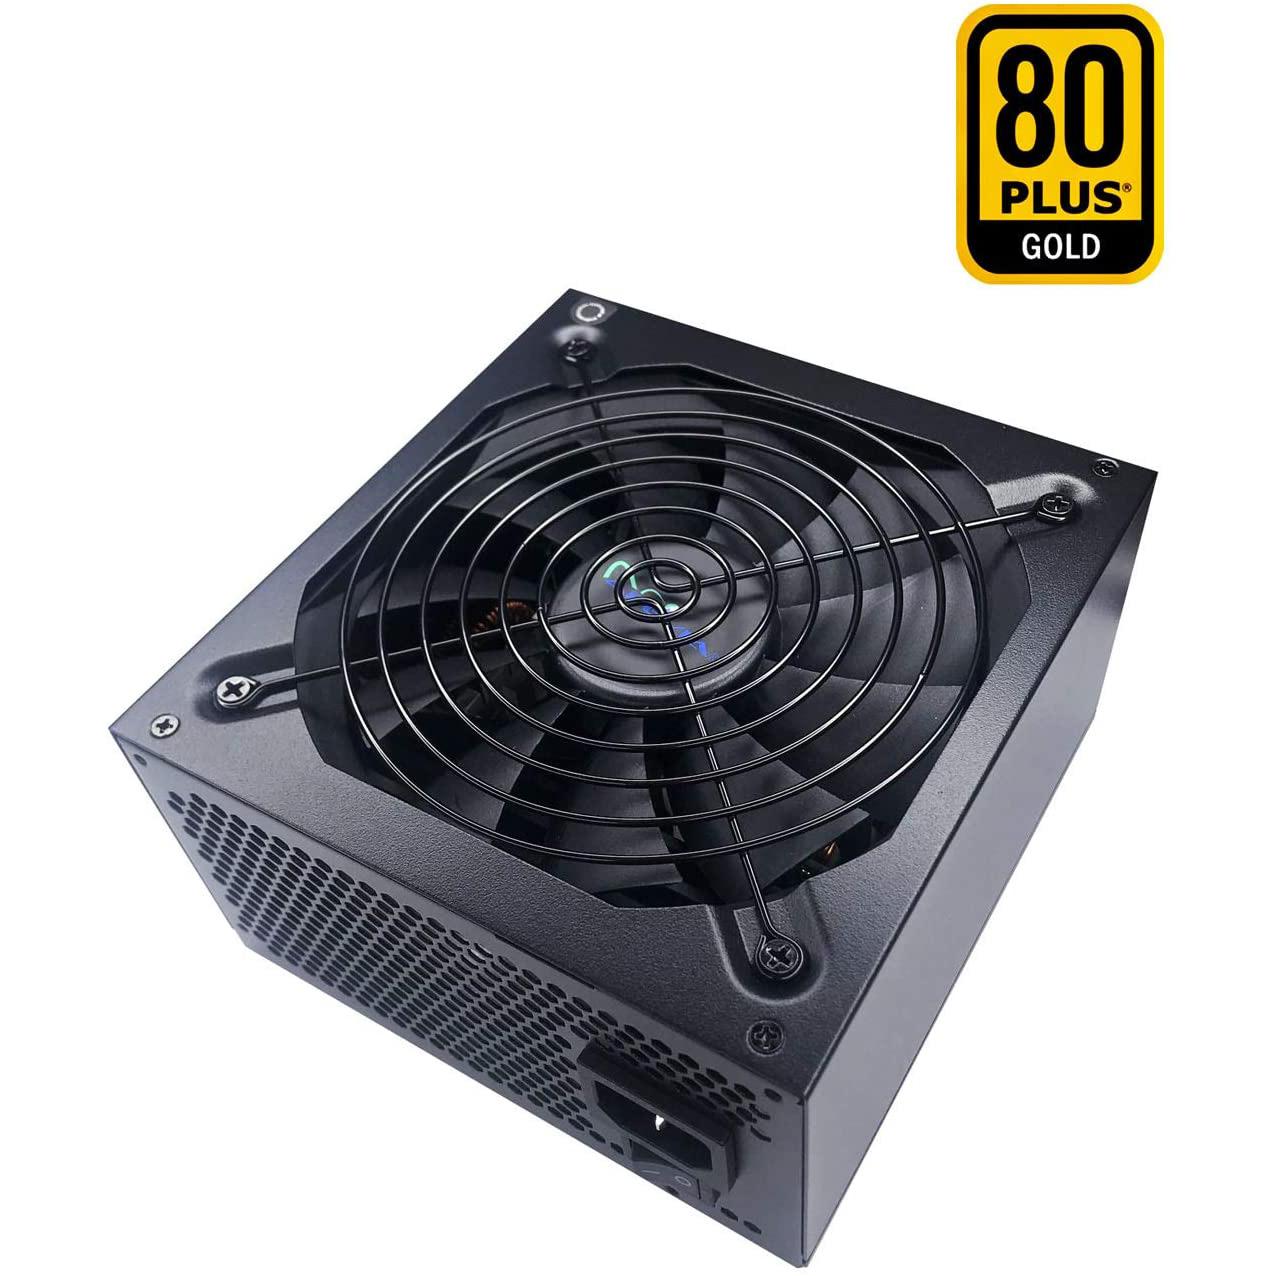 Apevia Prestige 600W 80+ Gold Certified ATX Power Supply for $52.99 Shipped